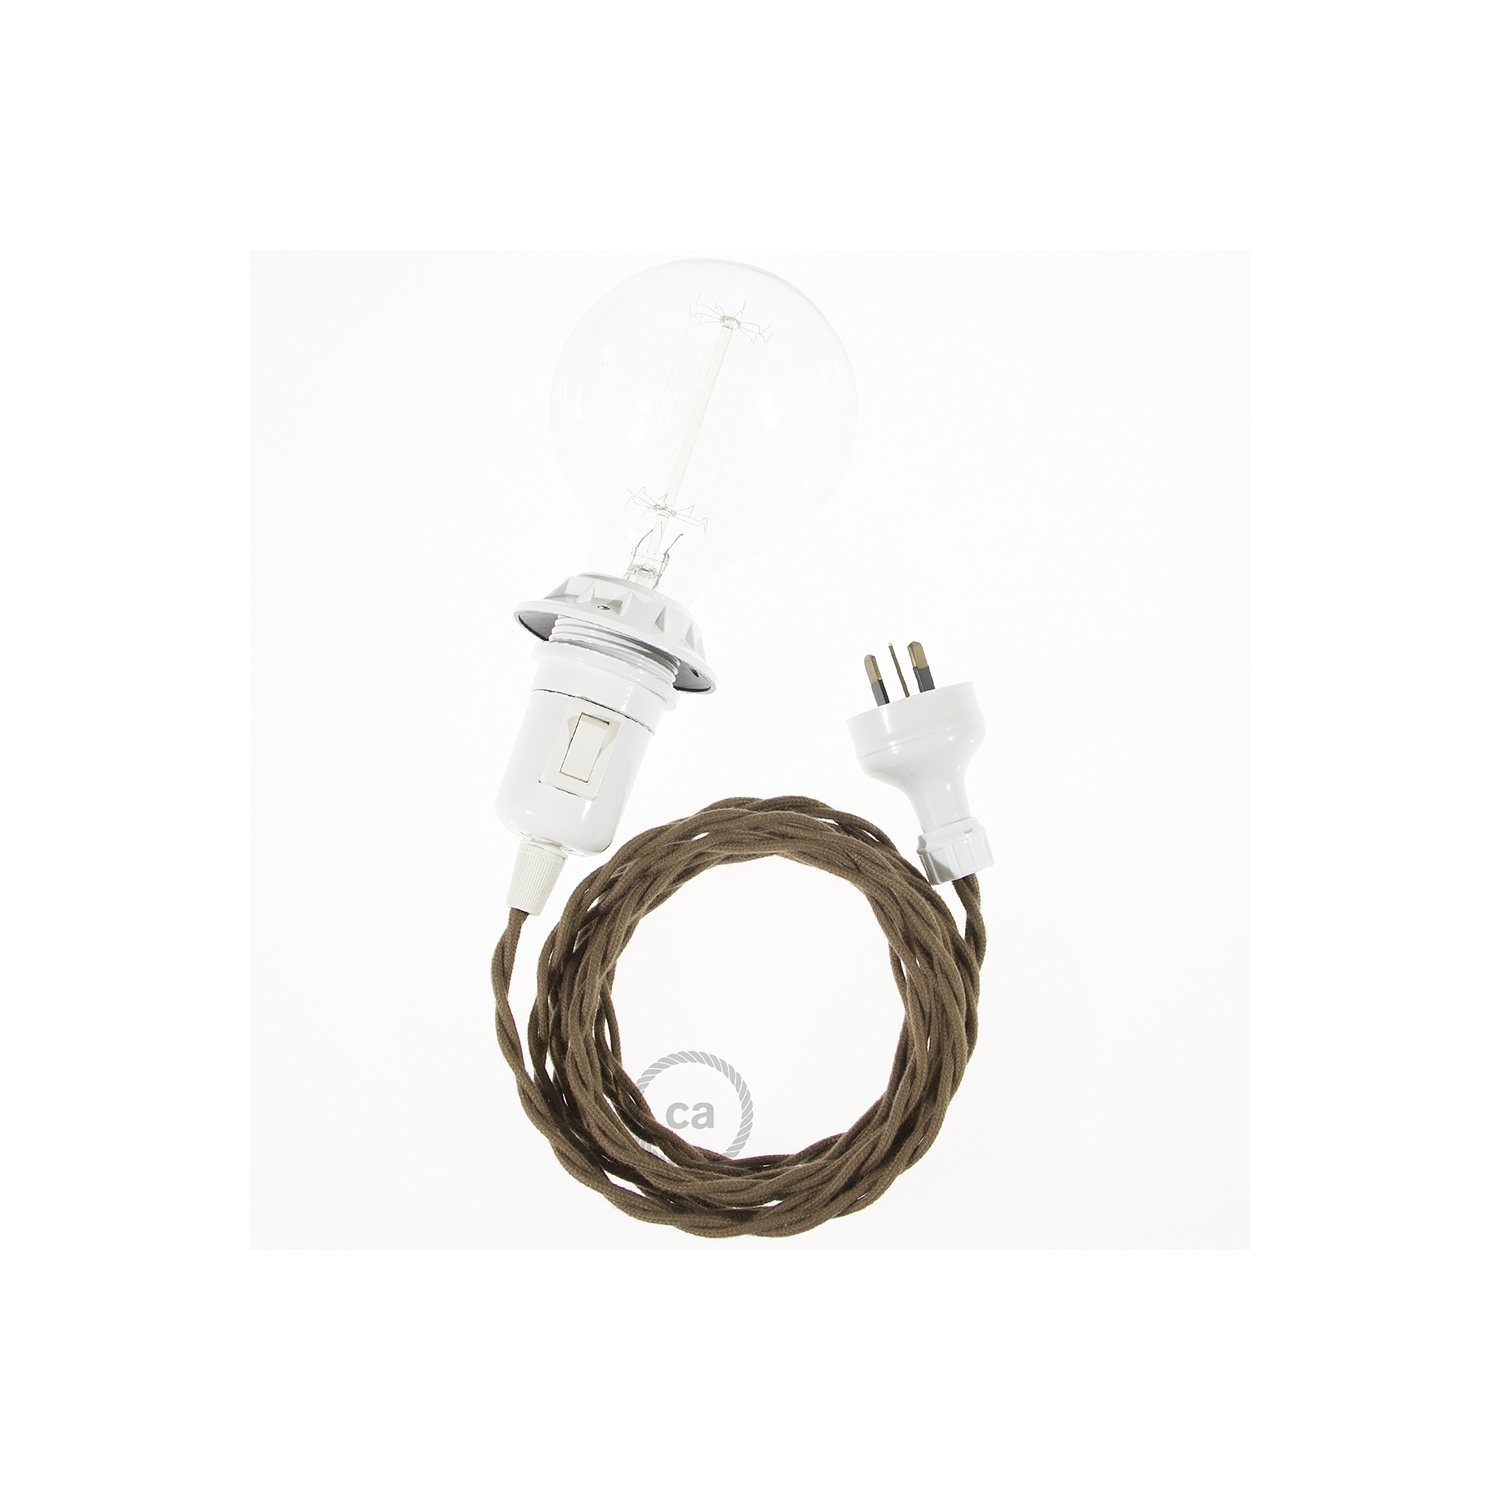 Create your TC13 Brown Cotton Snake for lampshade and bring the light wherever you want.